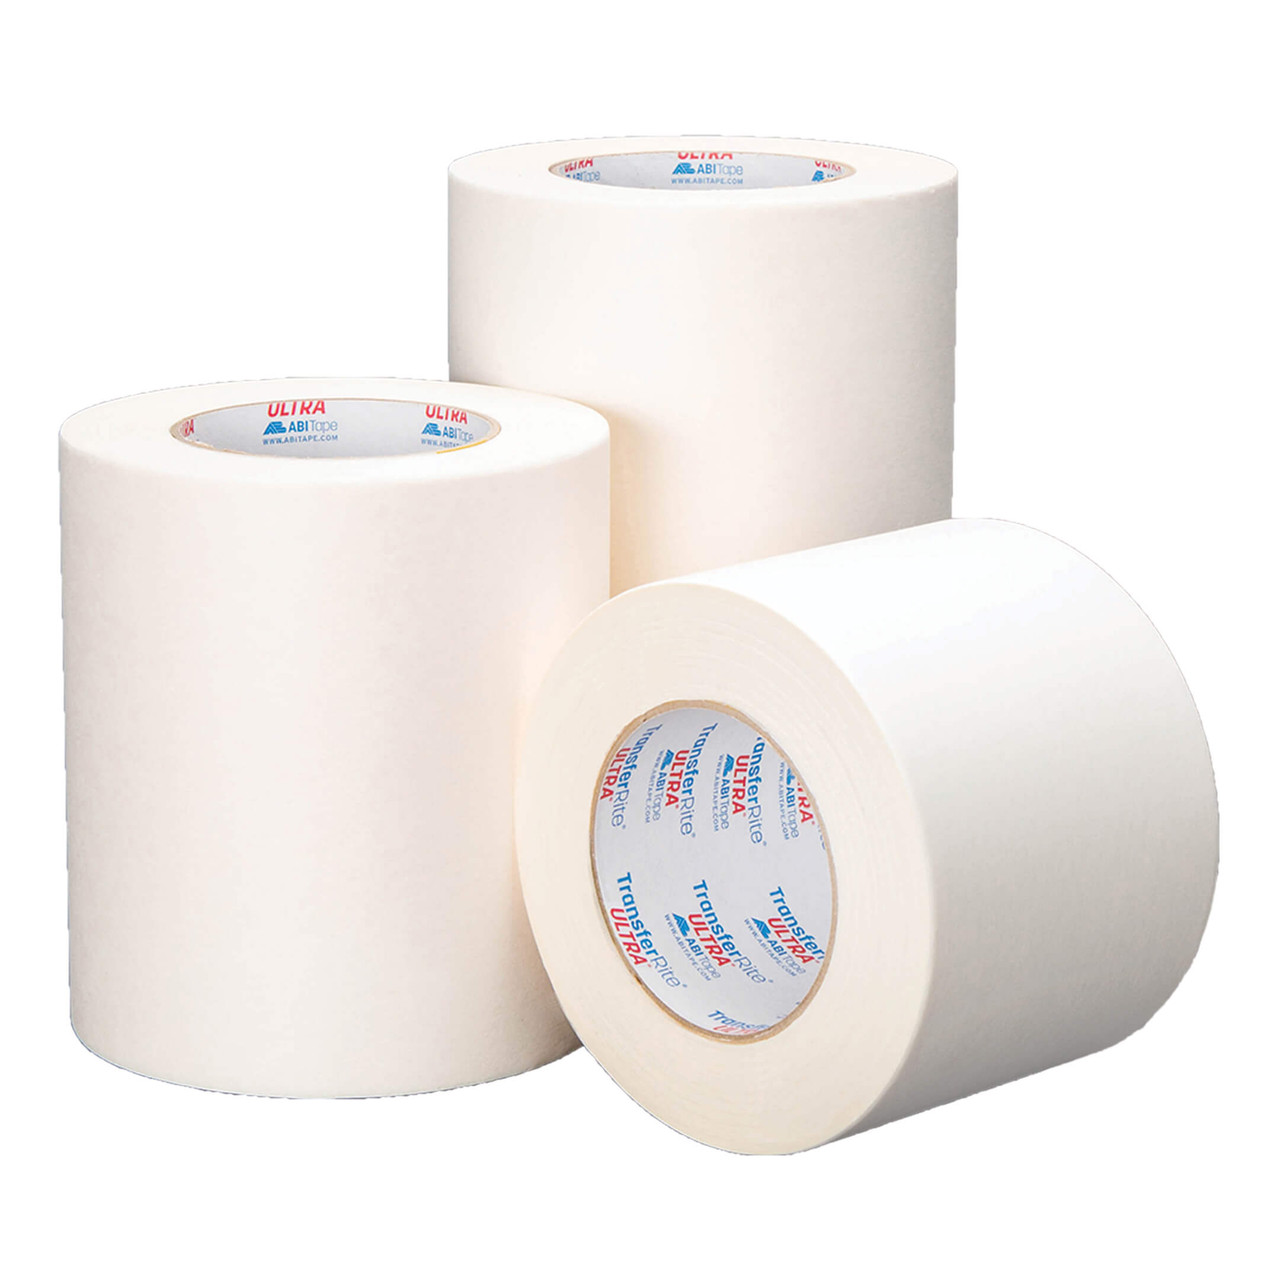 4 Rolls White Painters Tape Masking Tape 2 1 3/4 1/4 Inch Wide